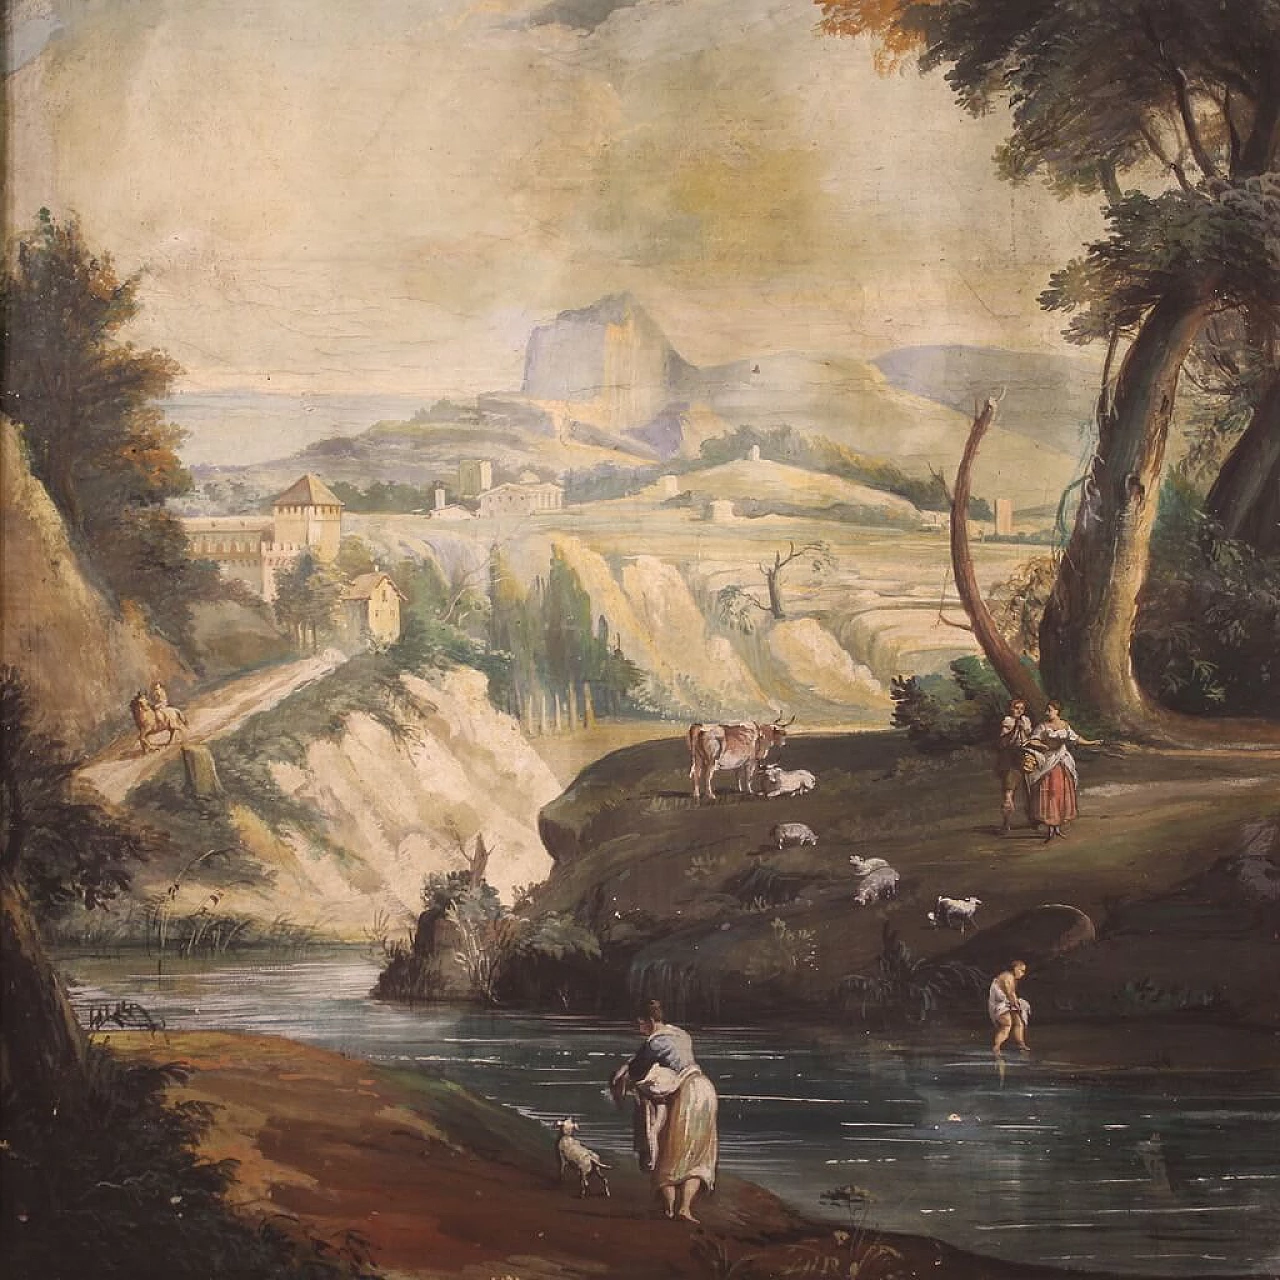 Landscape with figures, tempera painting on paper, late 18th century 1